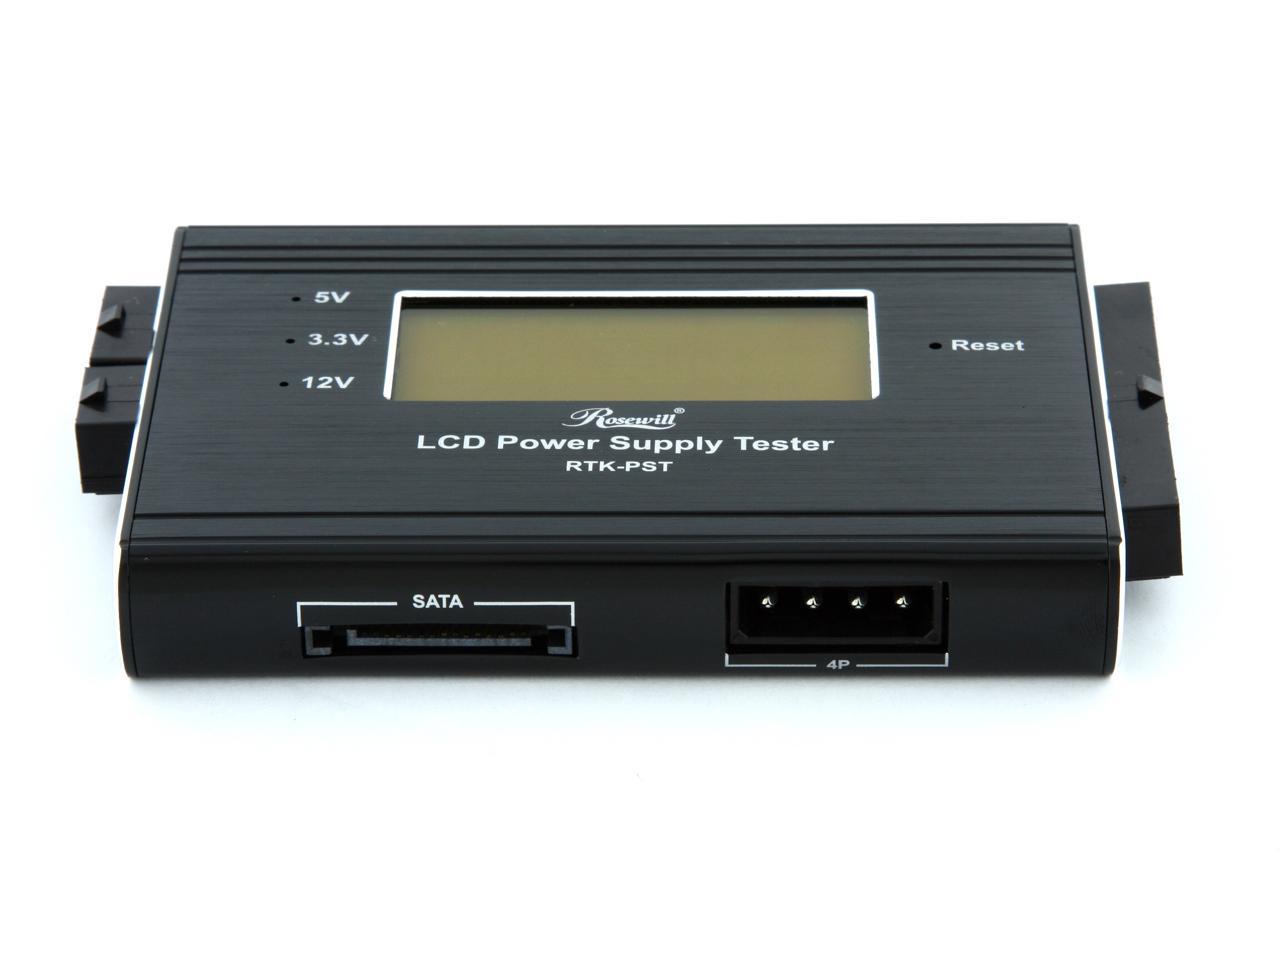 Rosewill Digital LCD Power Supply Tester RTK-PST